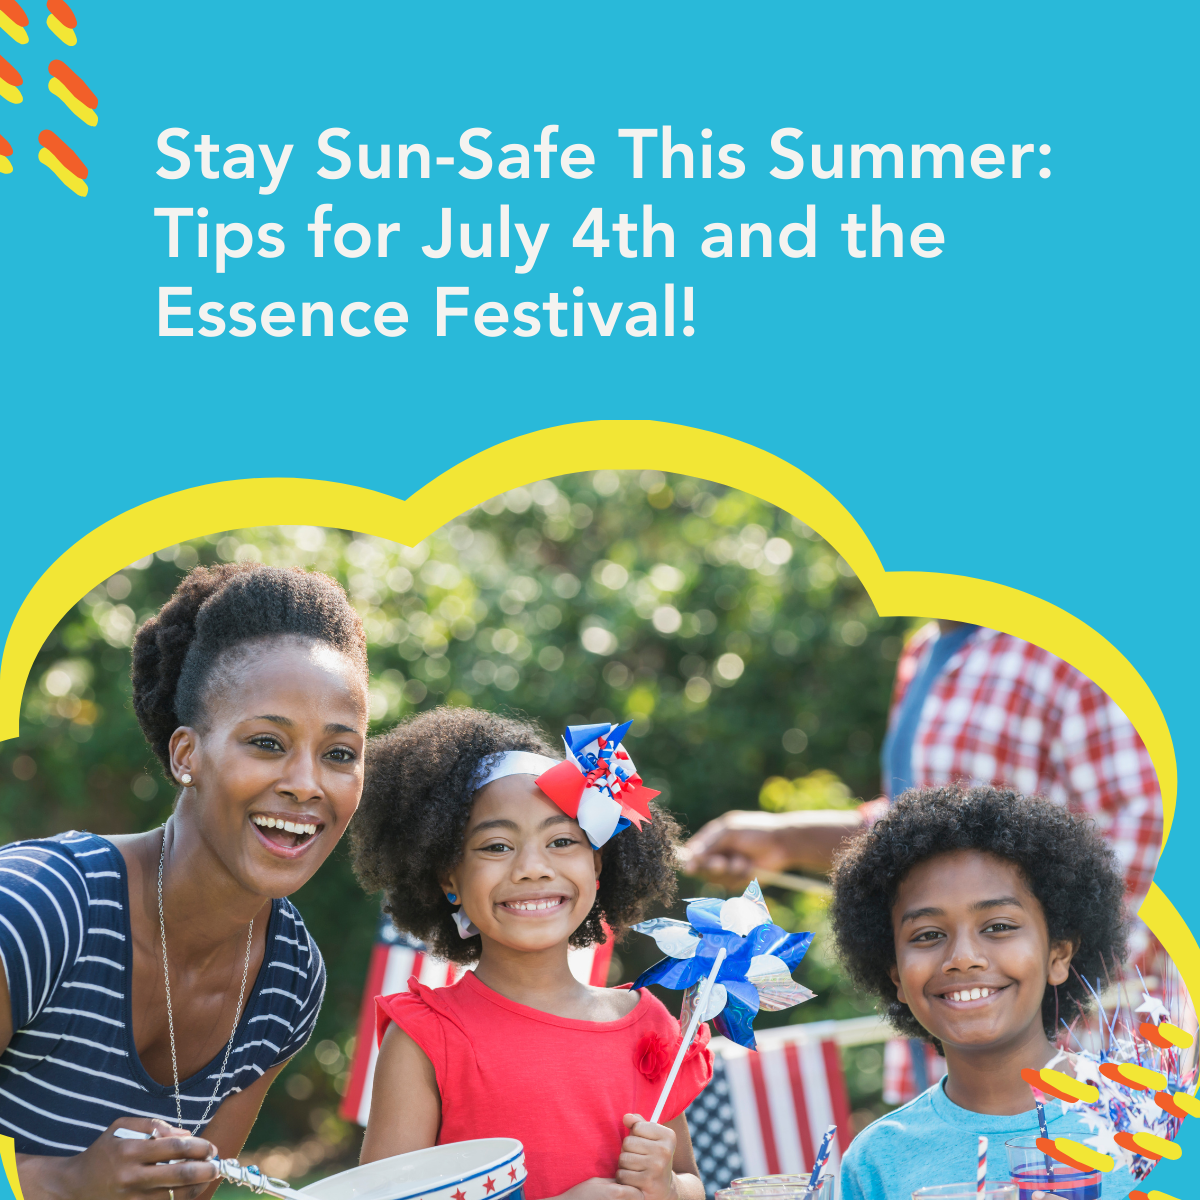 Stay Sun-Safe This Summer: Tips for July 4th and the Essence Festival!